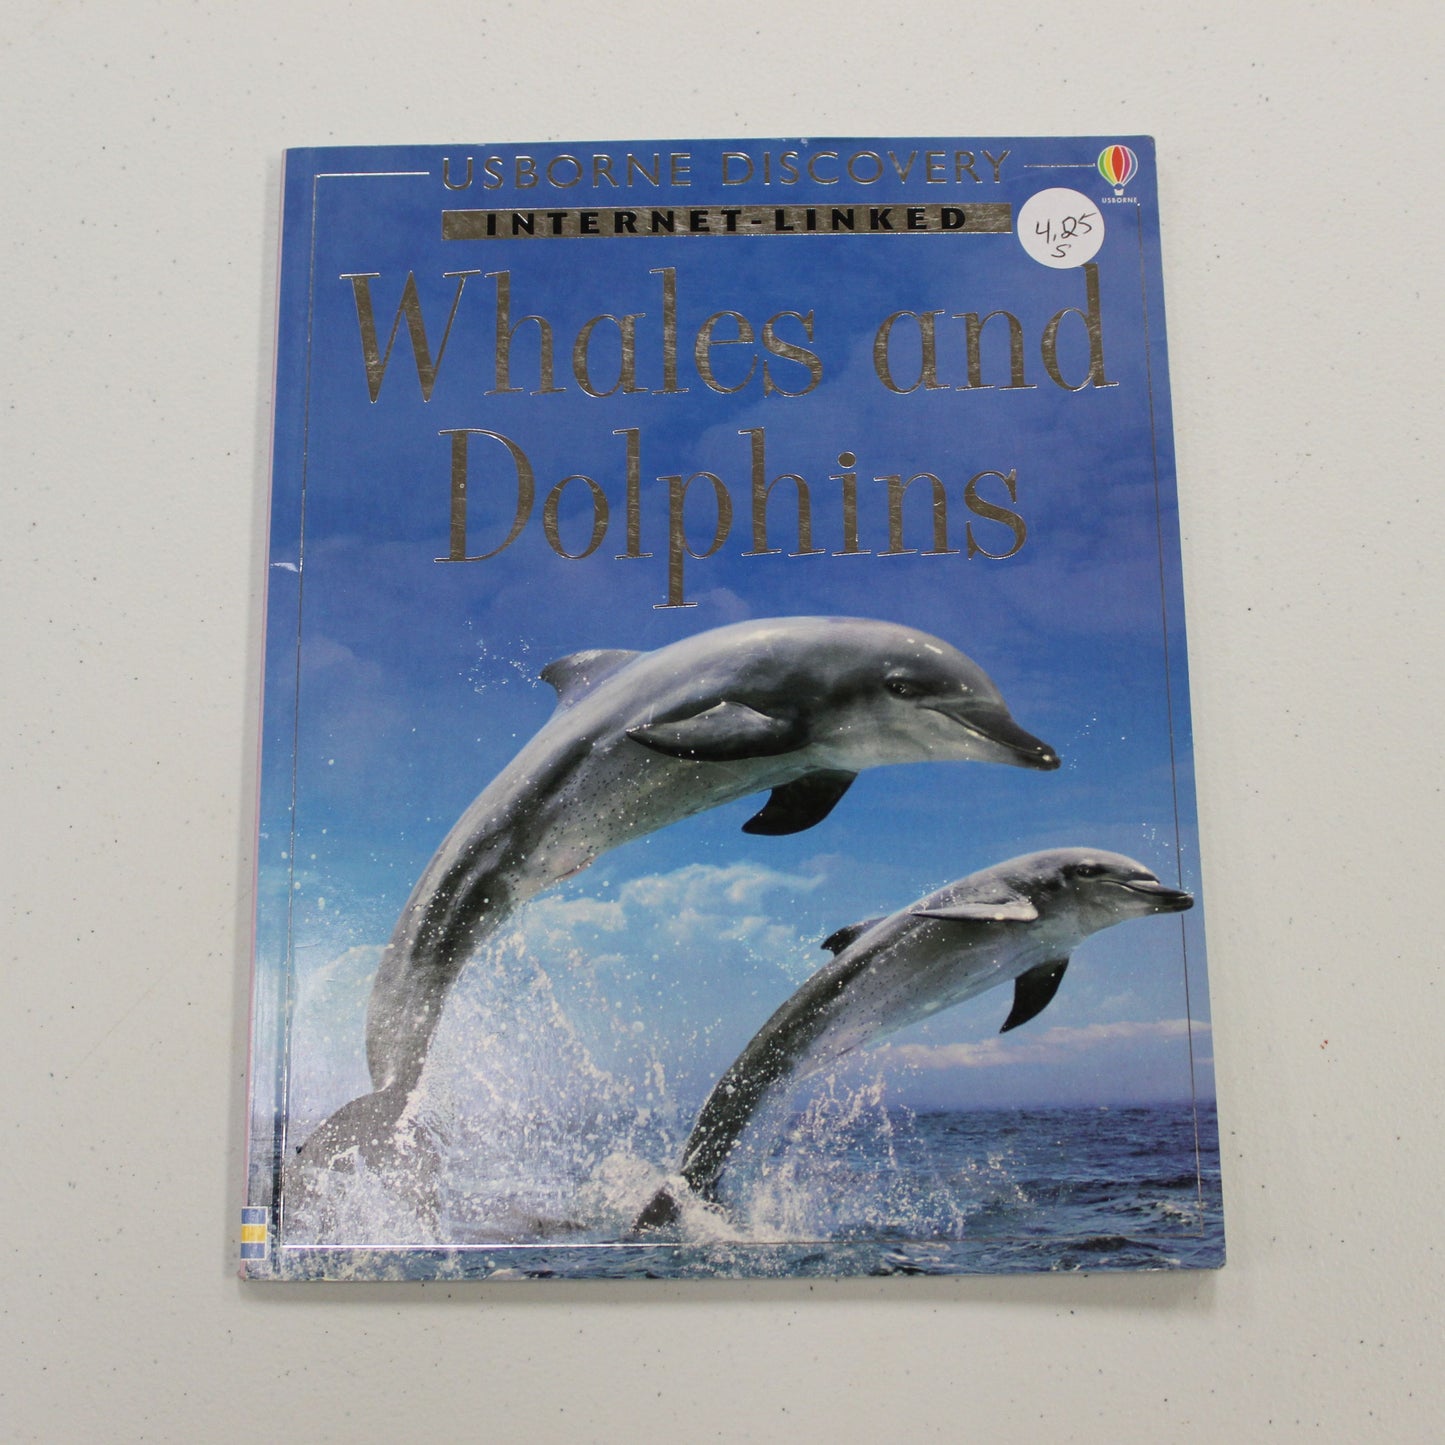 WHALES AND DOLPHINS